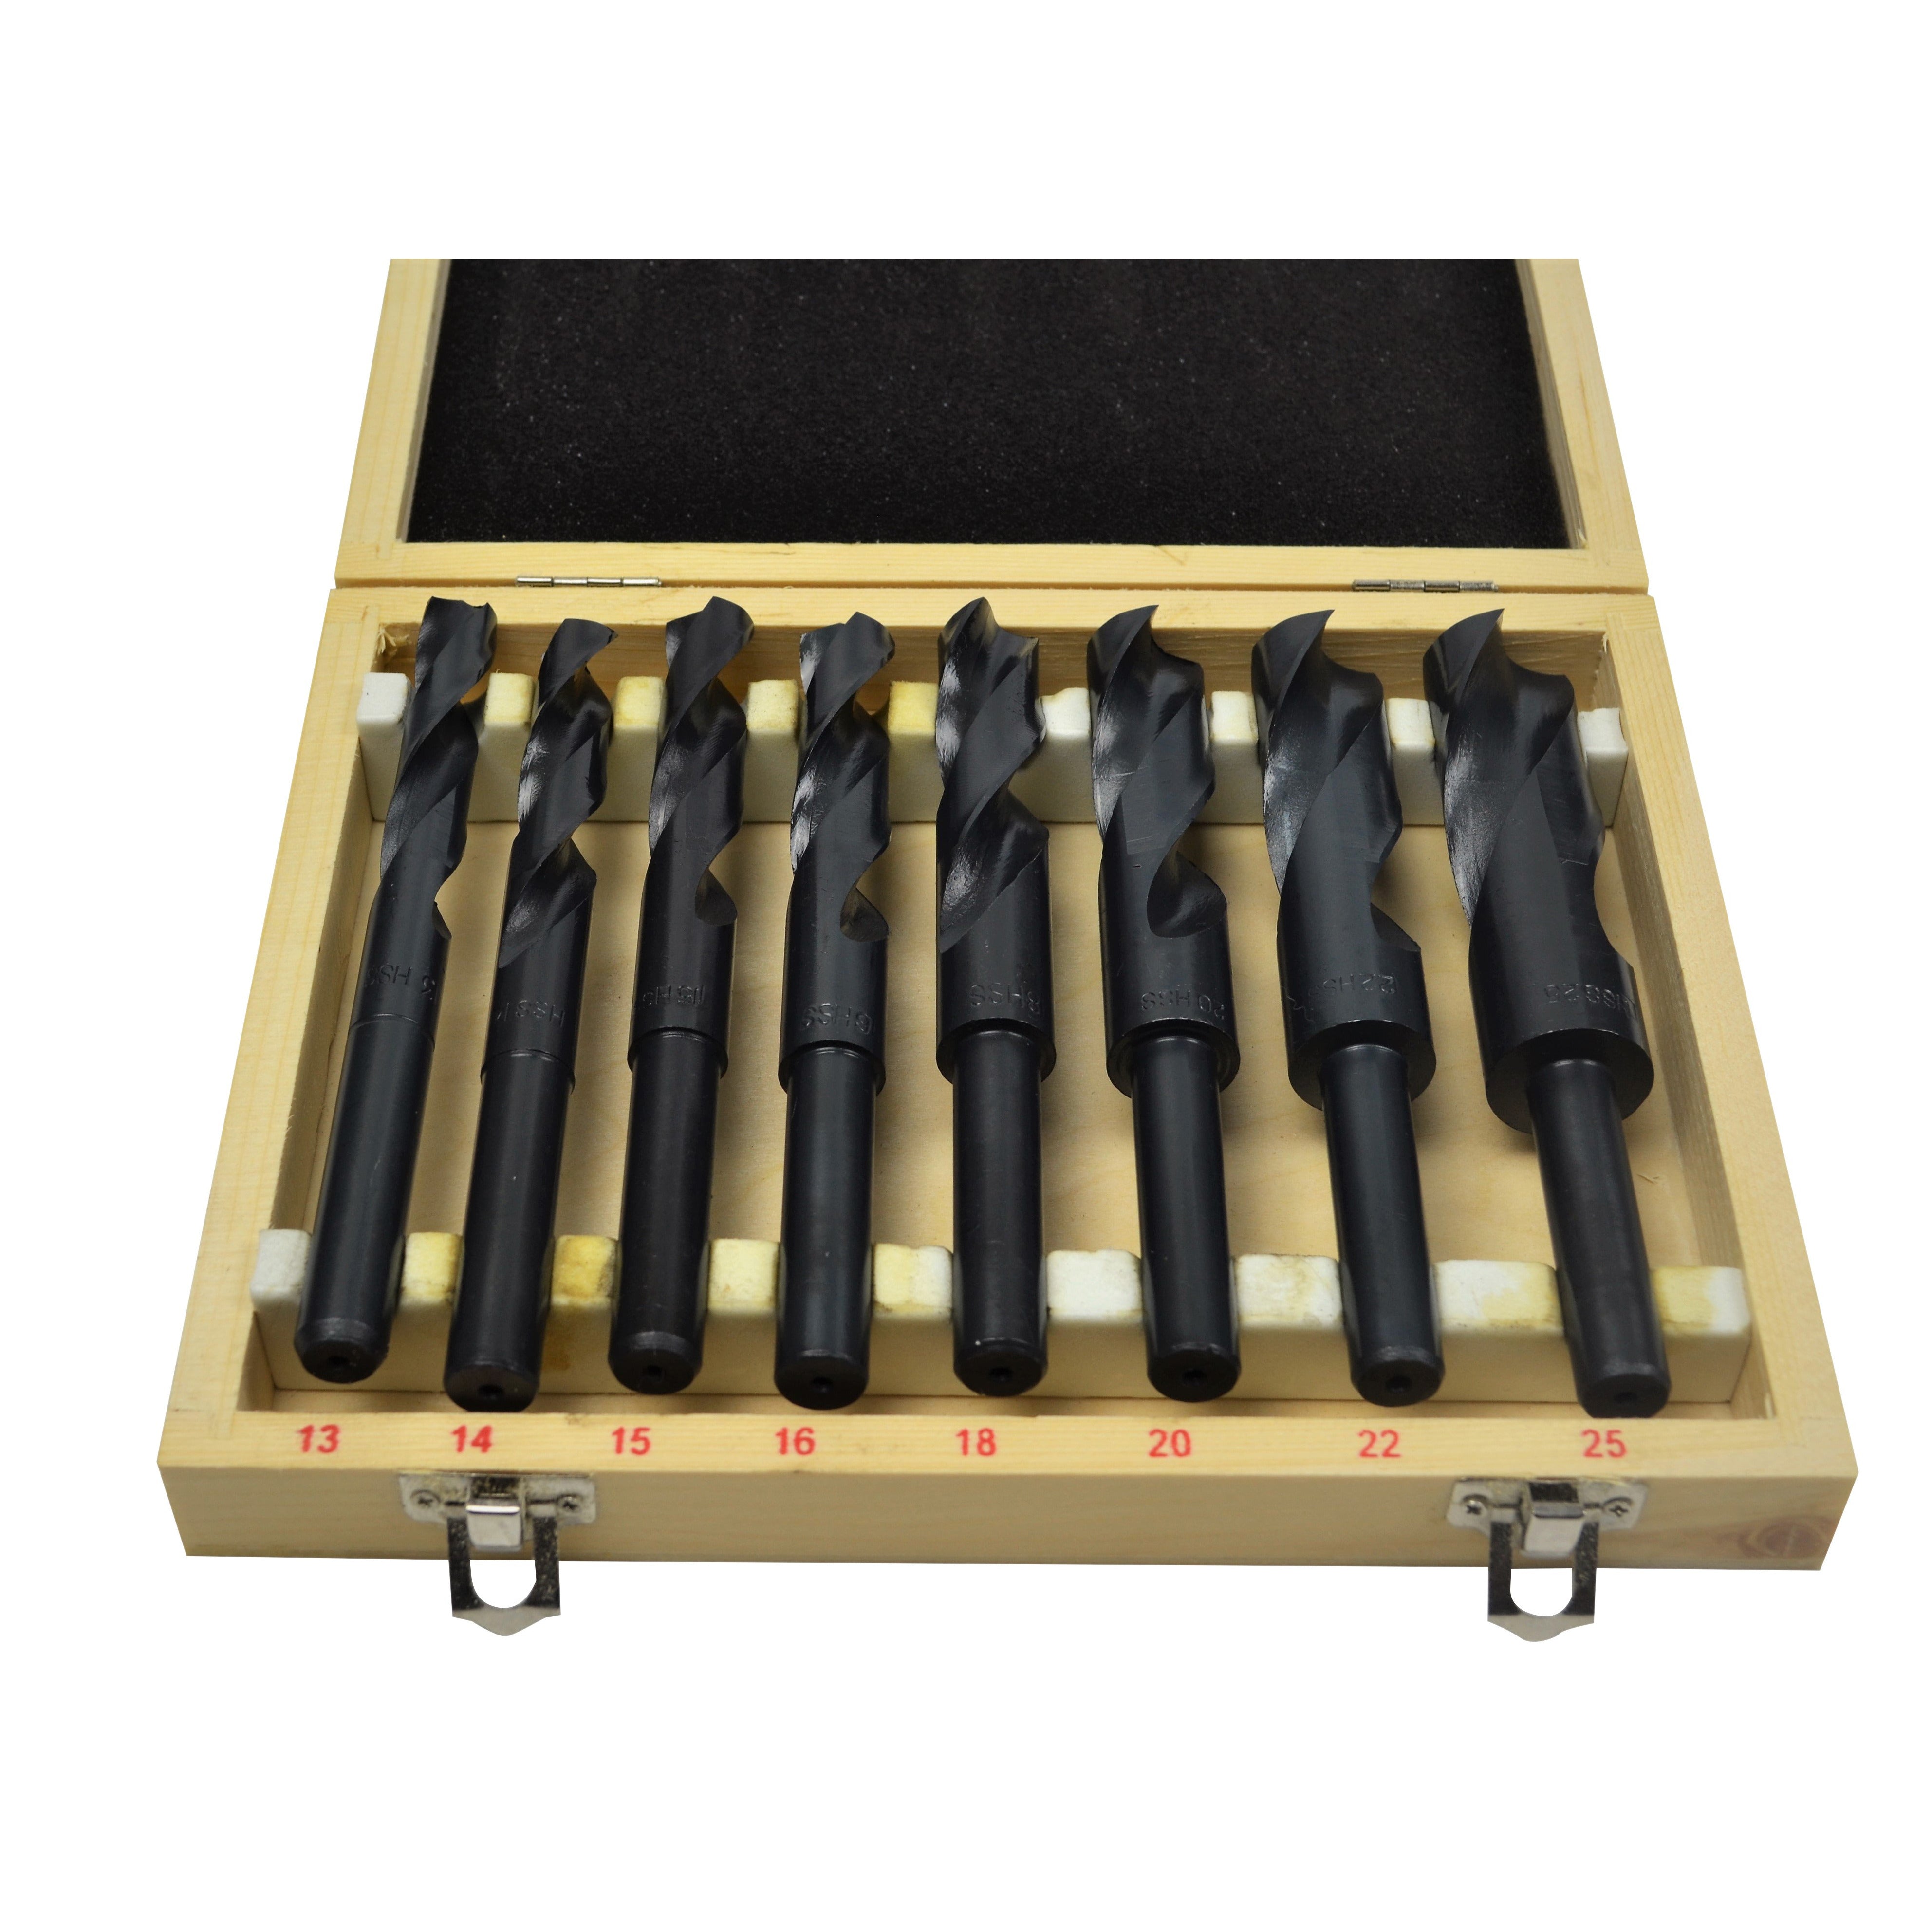 8 PC HSS Metric 13mm REDUCED SHANK DRILL SET DRILLS 13 up to 25mm